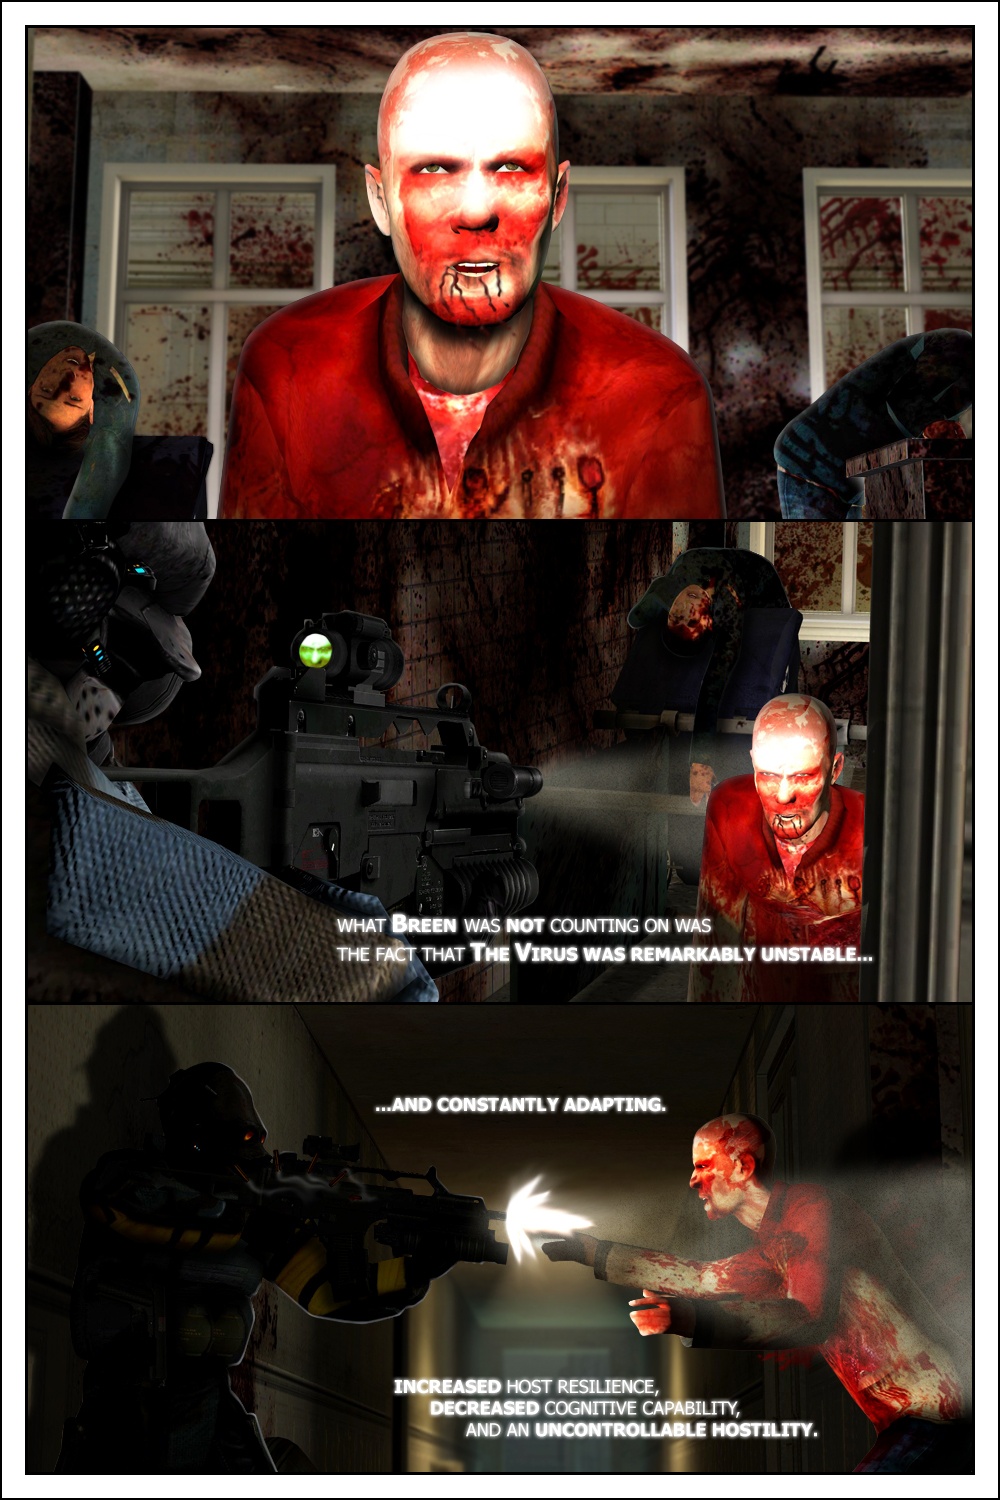 The infected stands up, corpses of civilians all around him in a bloodbath. The soldier aims at him and starts shooting, but the infected leaps at him. The narration resumes: what Breen was not counting on was the fact that the virus was remarkably unstable and constantly adapting. Increased host resilience, decreased cognitive capability and an uncontrollable hostility.